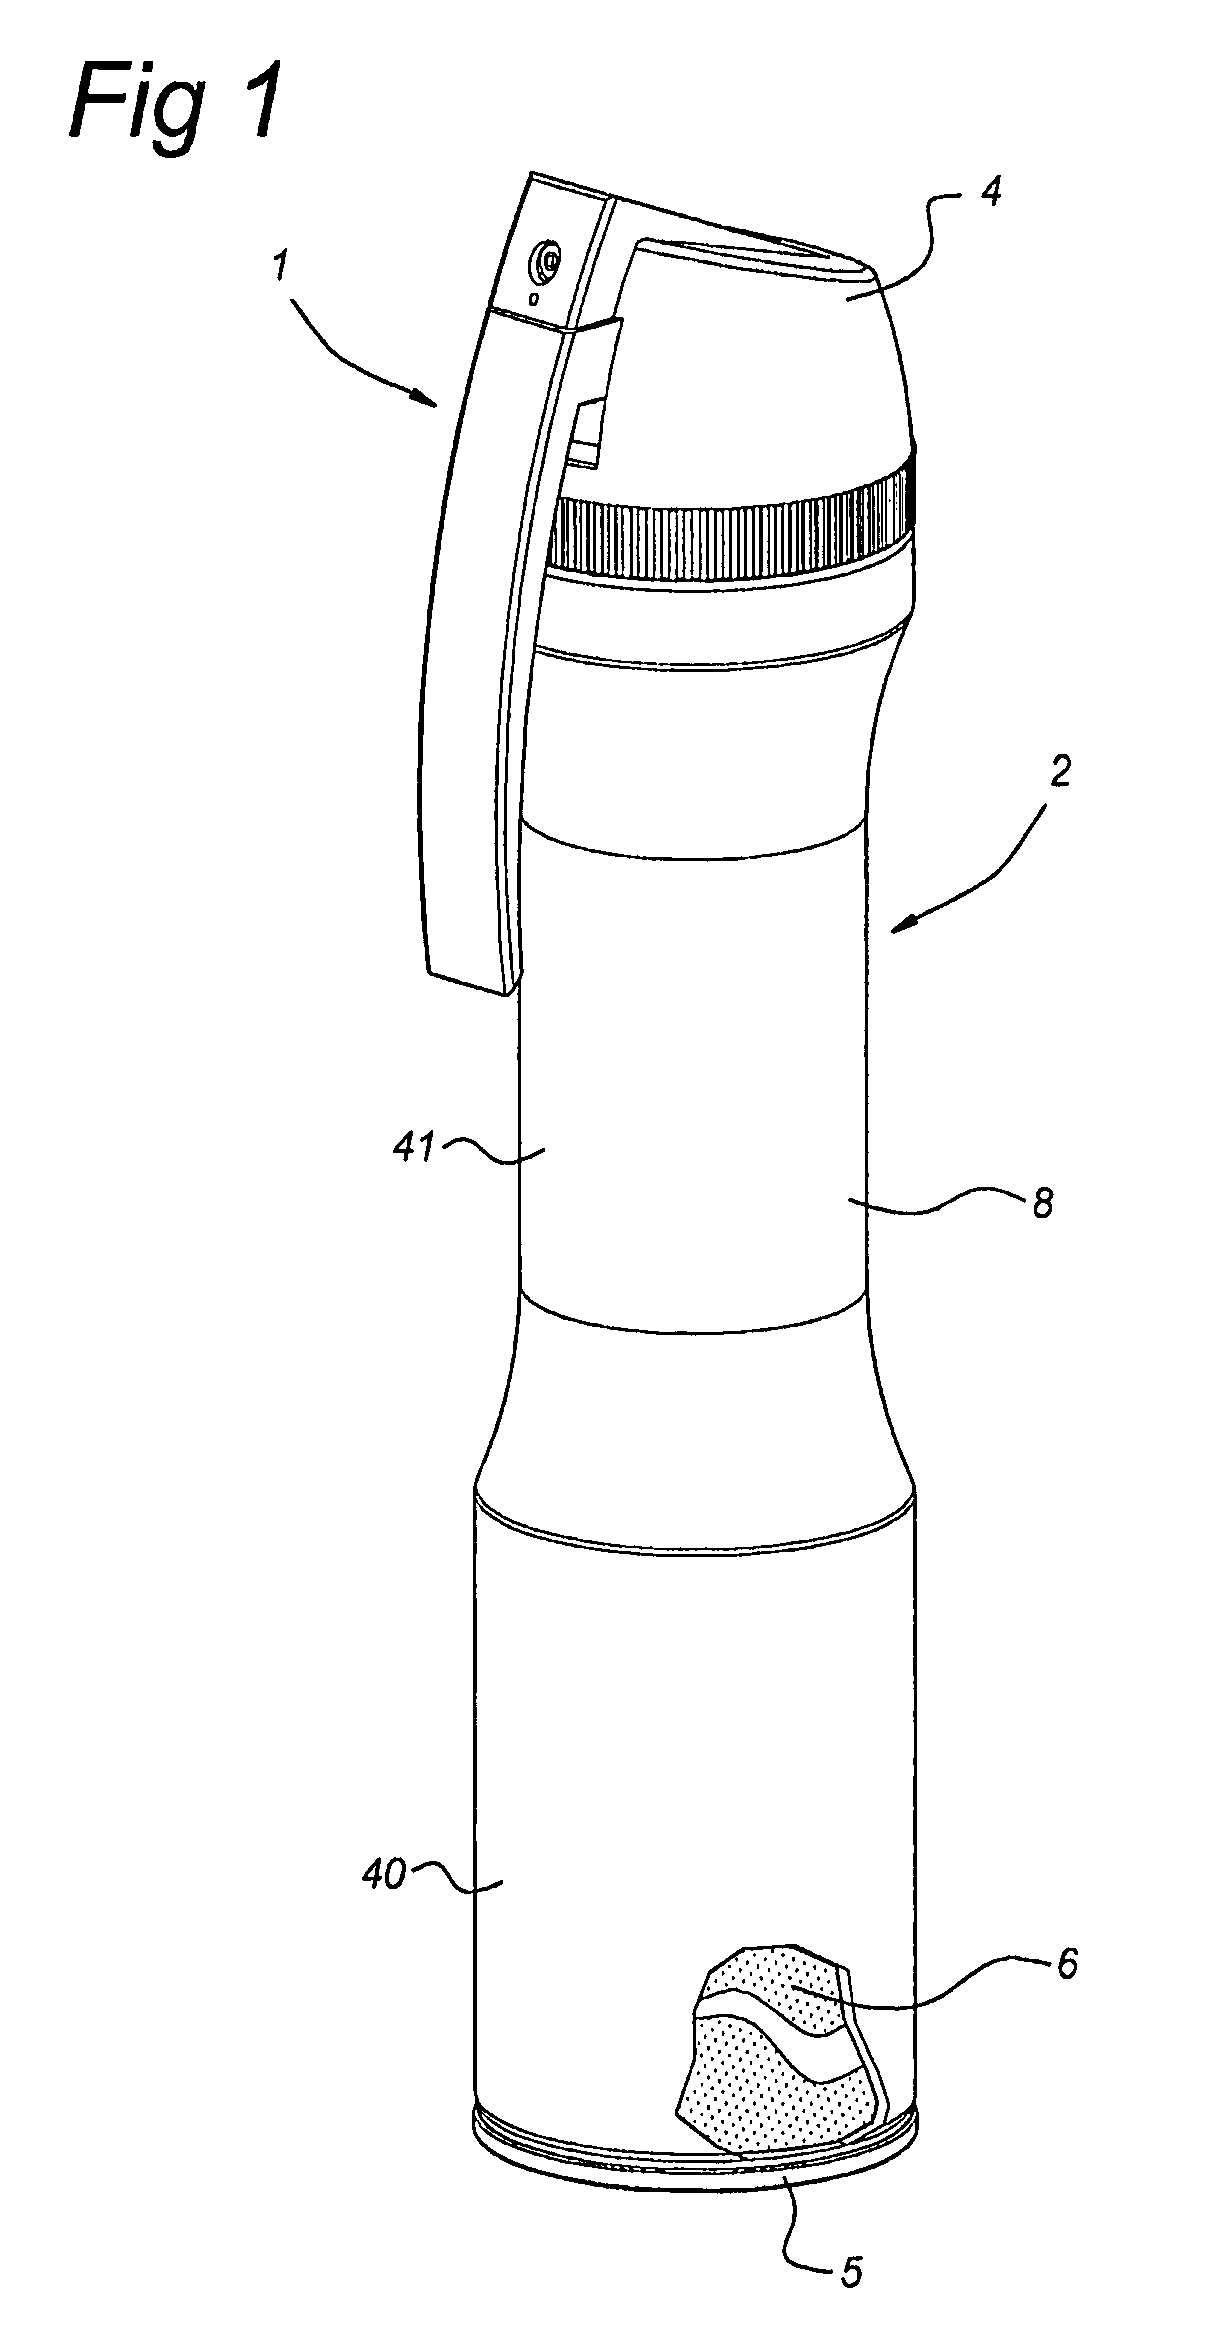 Dispensing device for dispensing a product